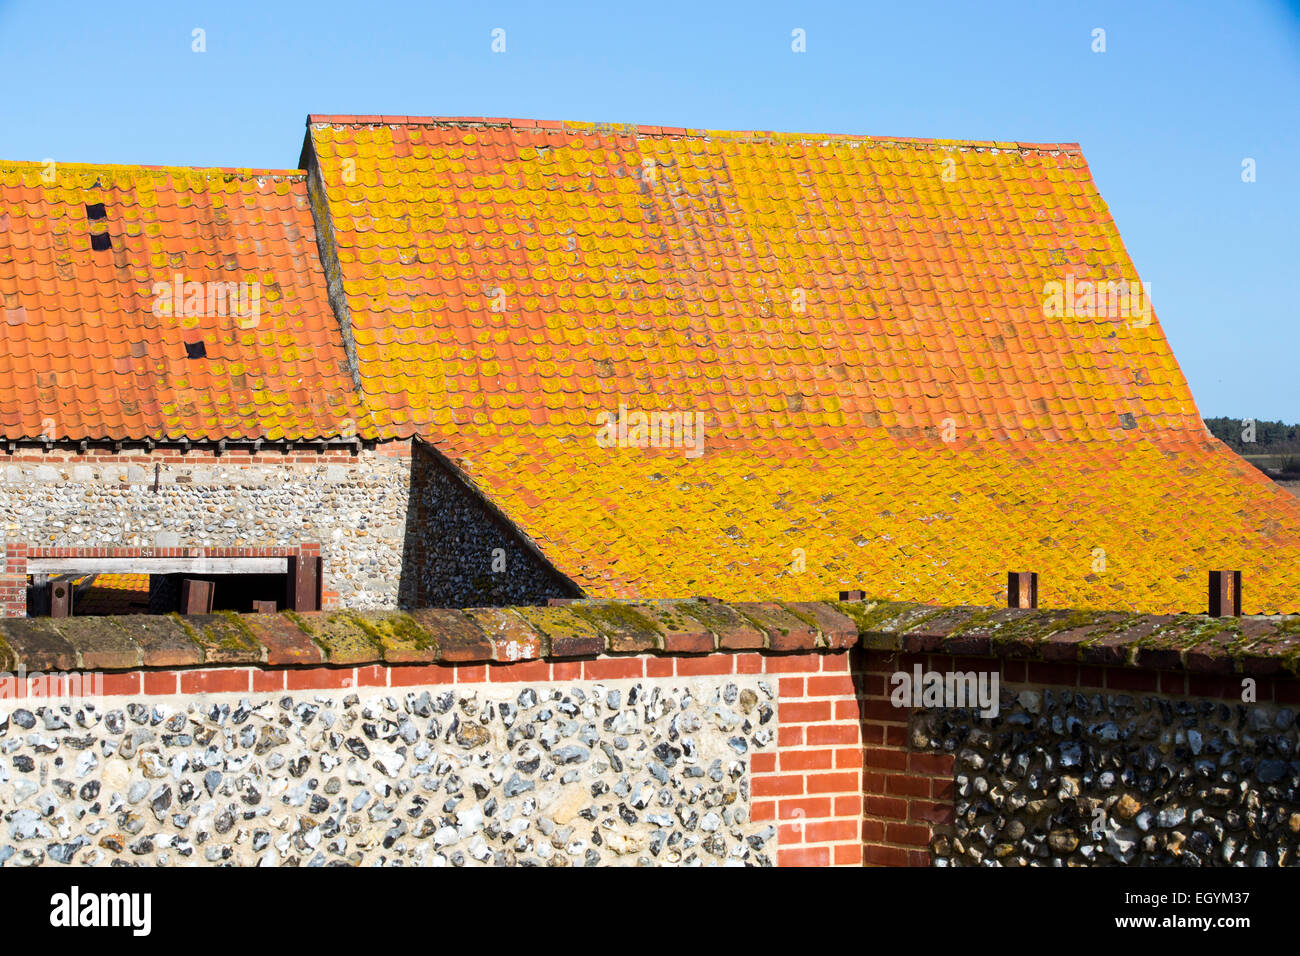 Lichen covered clay tiled roofed barns at a farm in Binham, North Norfolk, UK. Stock Photo